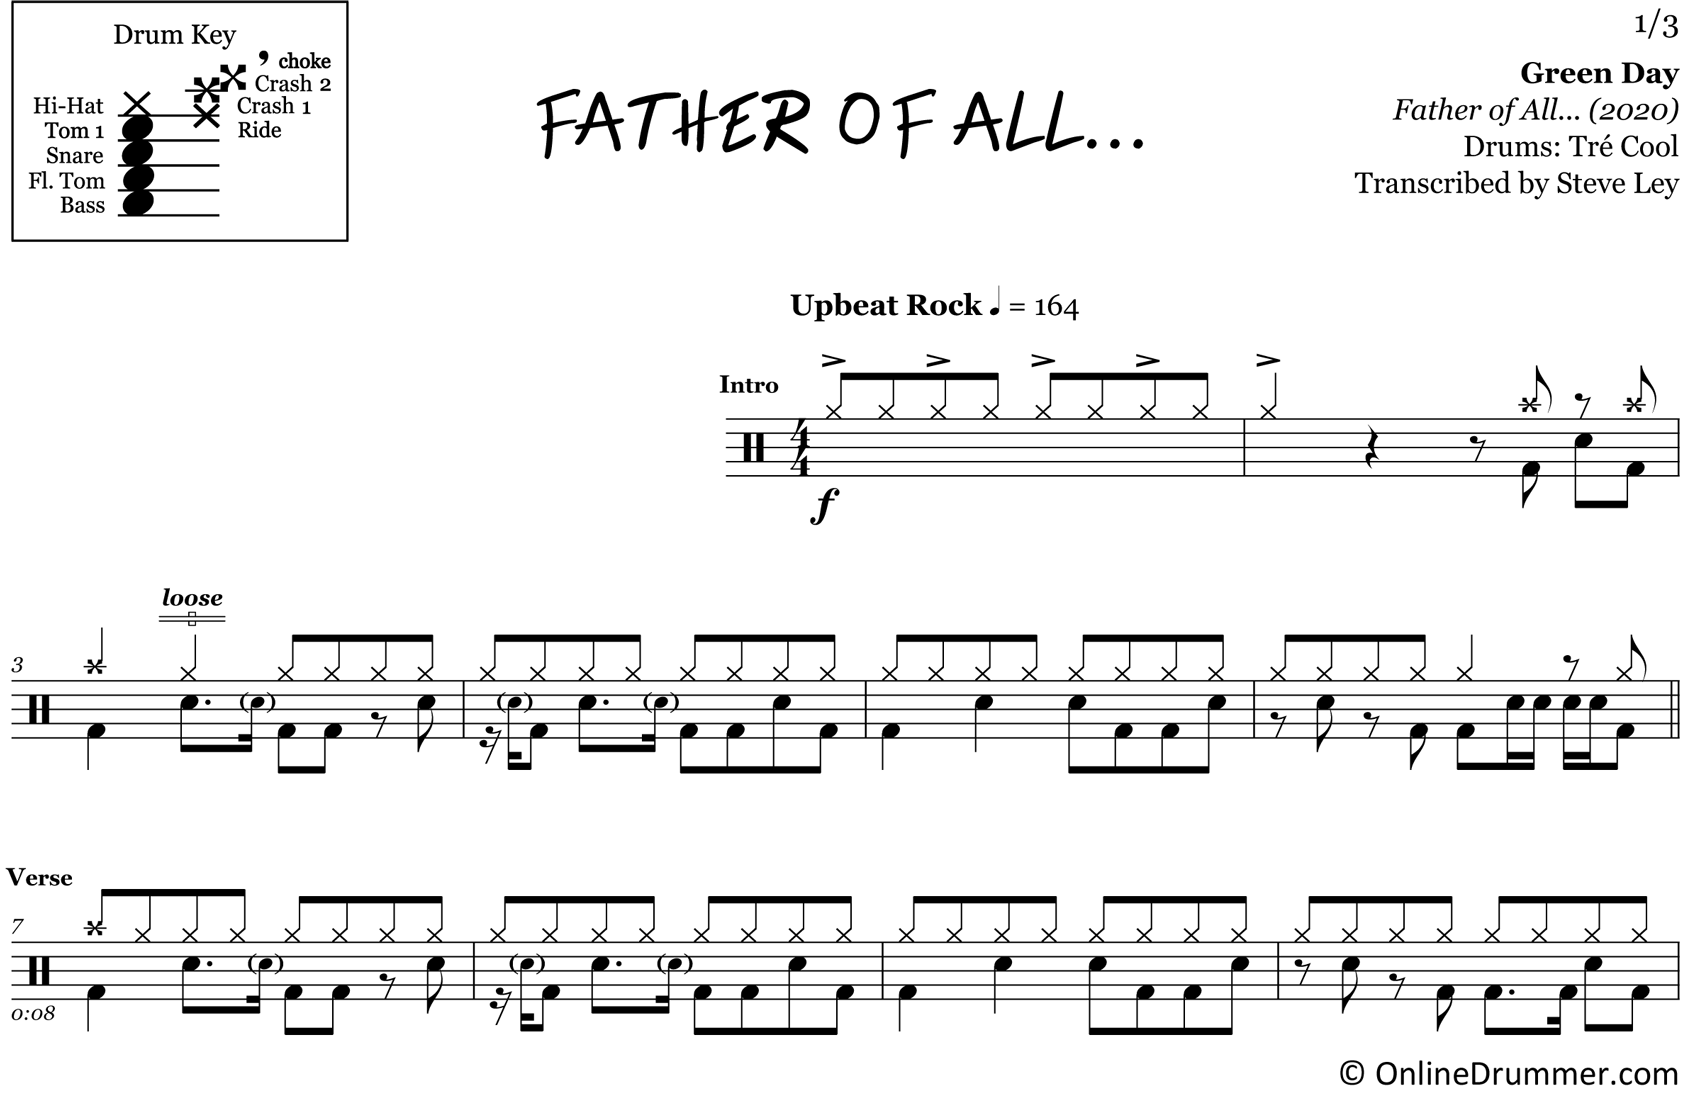 Father of All - Green Day - Drum Sheet Music